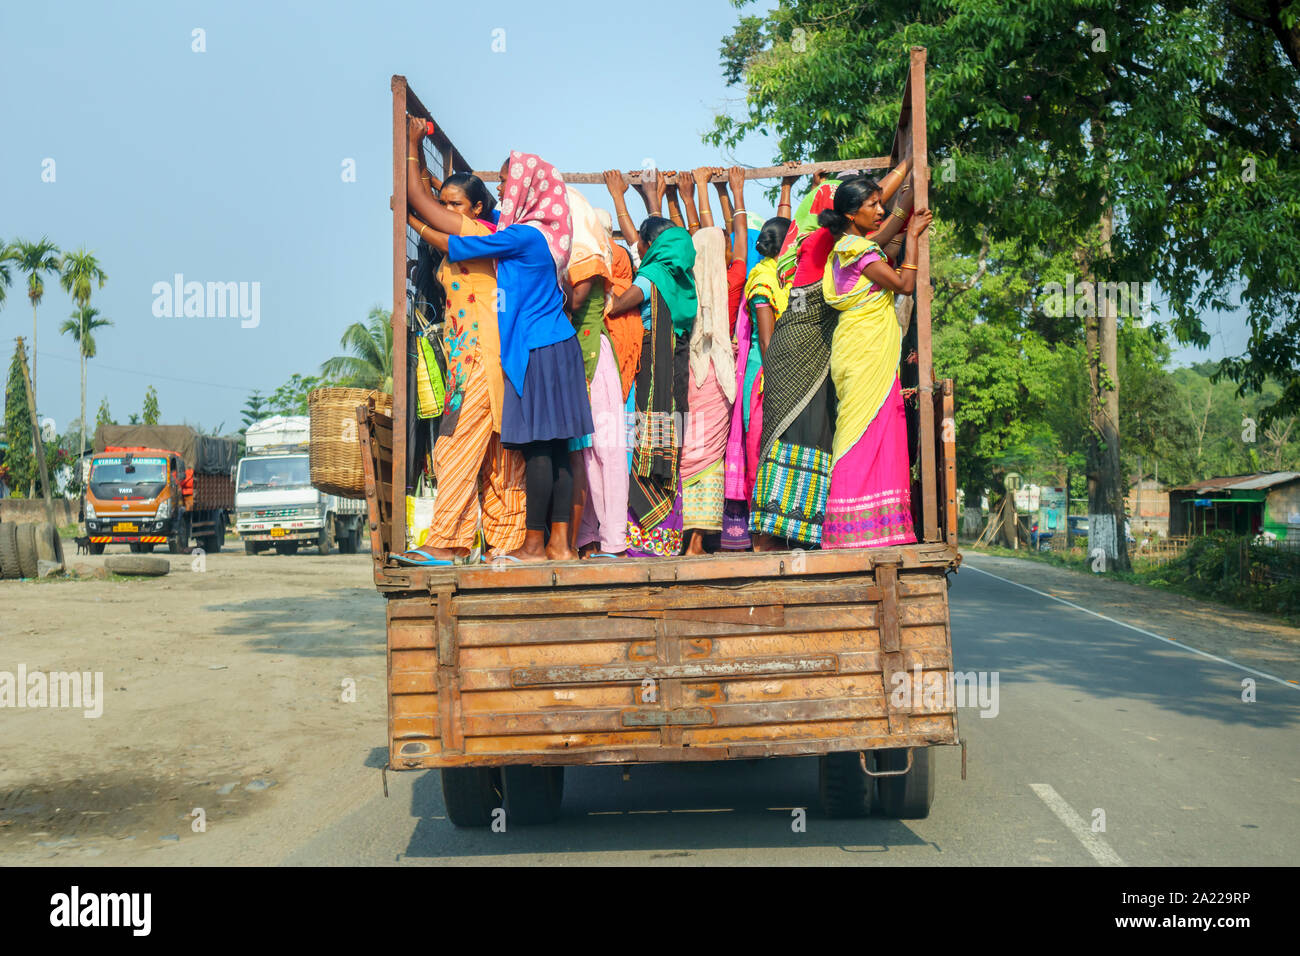 Women in colourful local dress and saris stand in the back of a truck on a road near Kaziranga, Golaghat District, Bochagaon, Assam, India Stock Photo